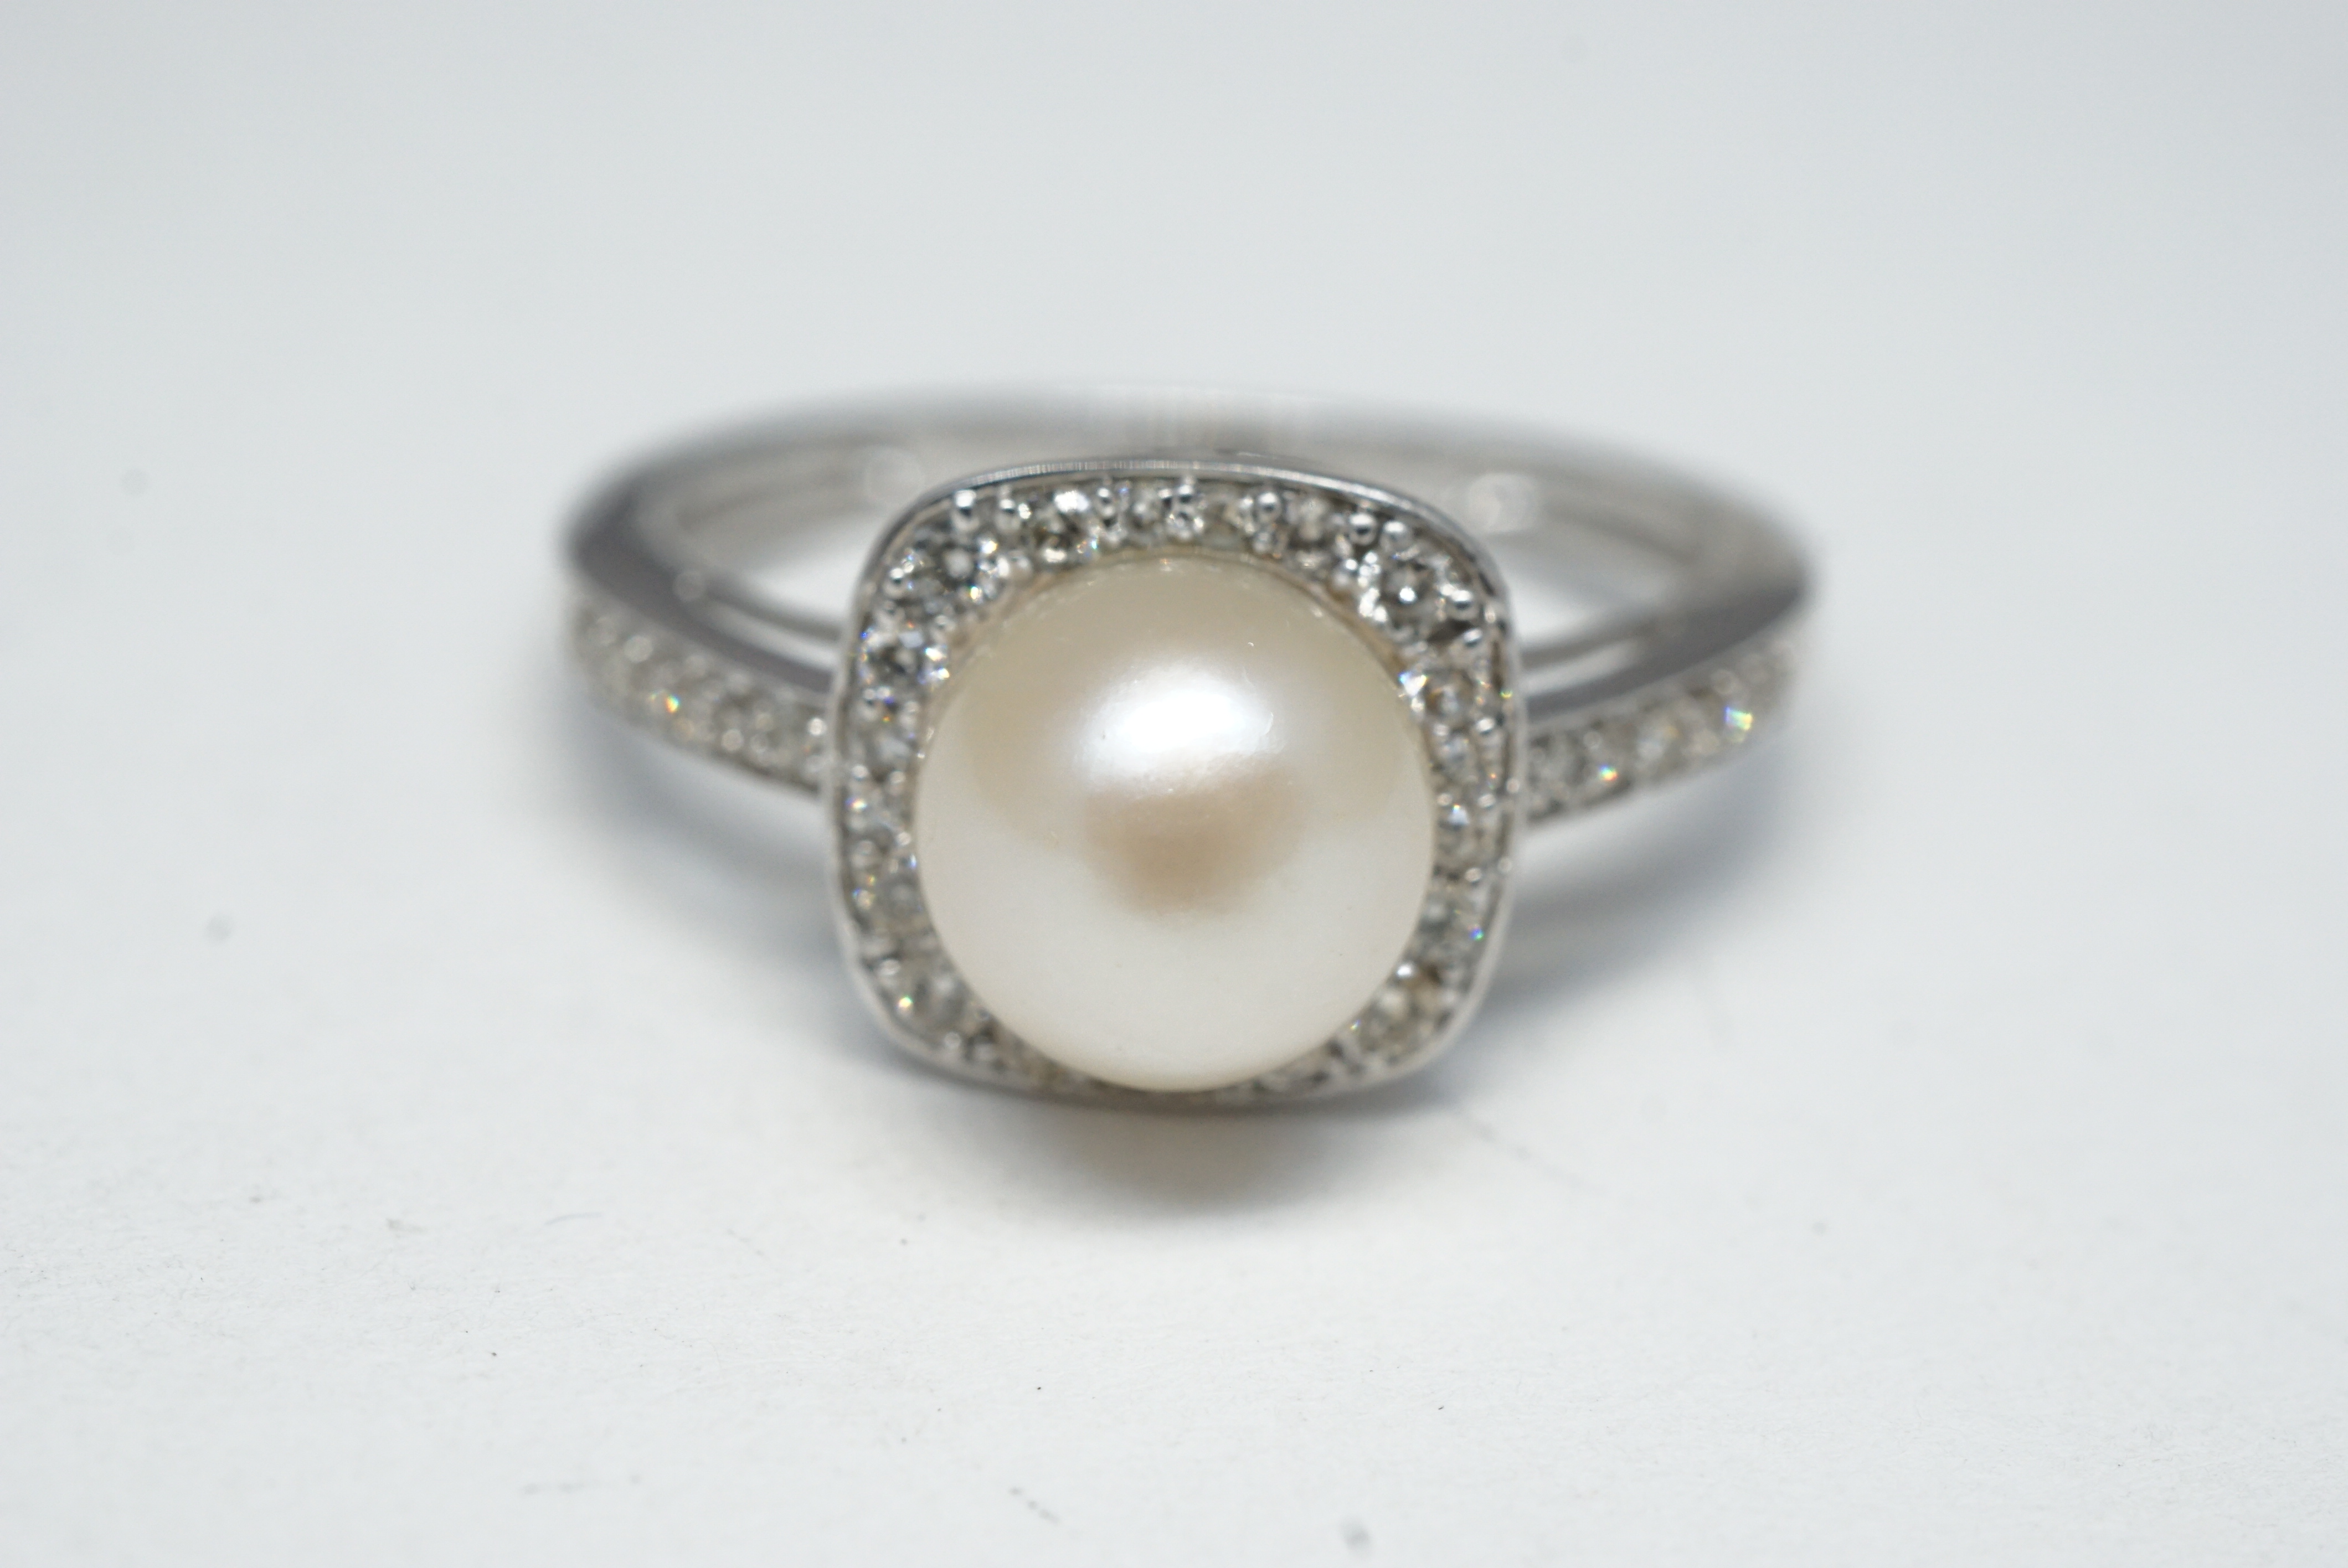 can a pearl ring coating be repaired?